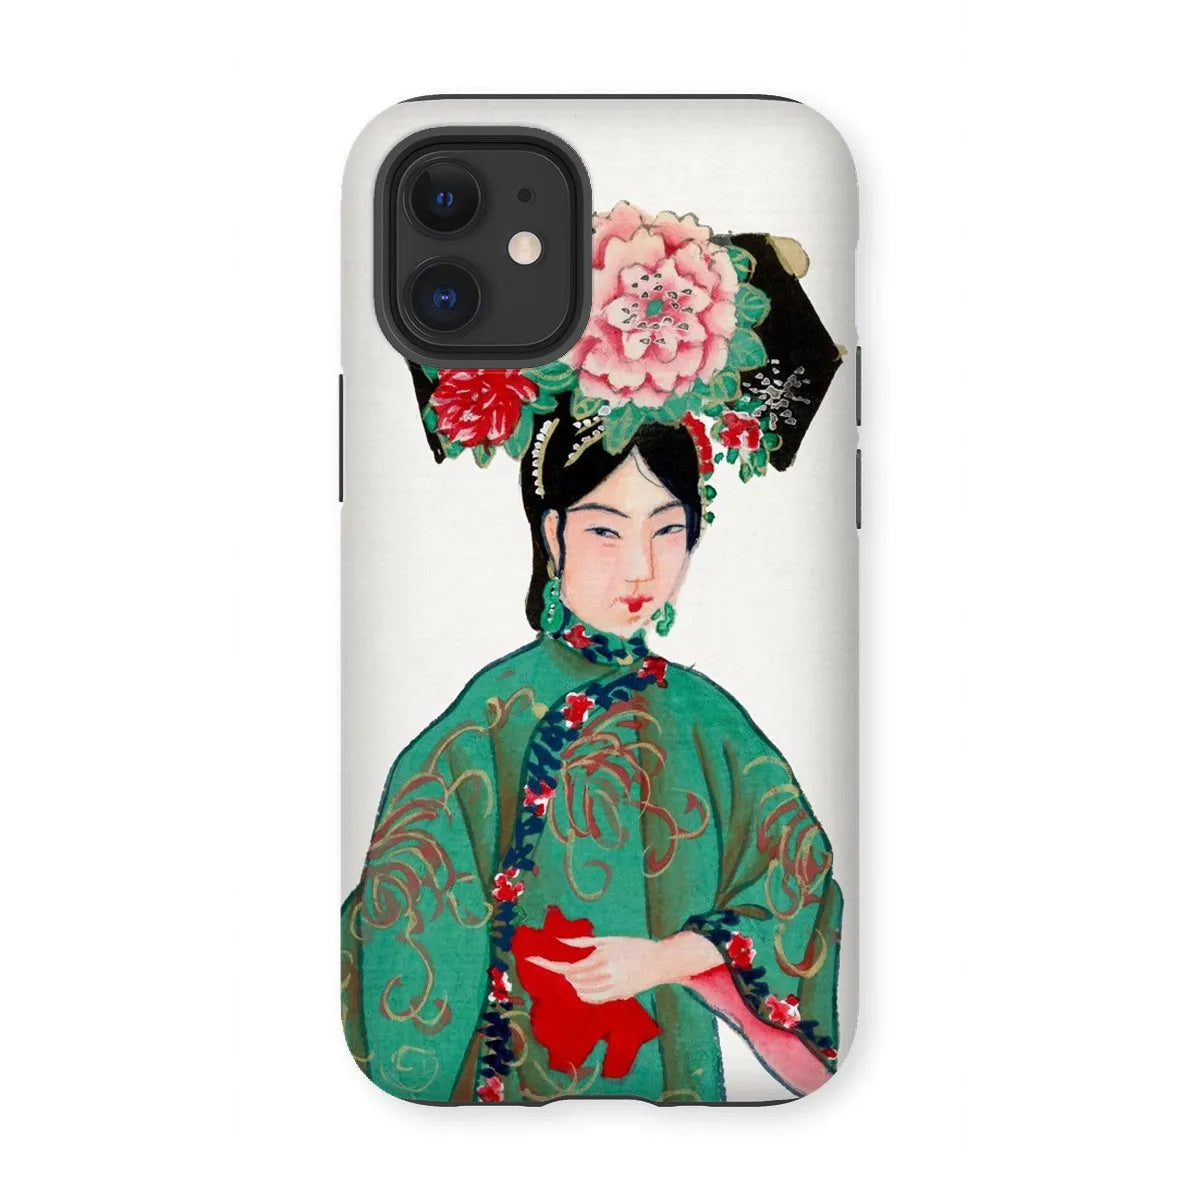 Chinese Noblewoman In Manchu Couture Art Phone Case - Iphone 12 Mini / Matte - Mobile Phone Cases - Aesthetic Art